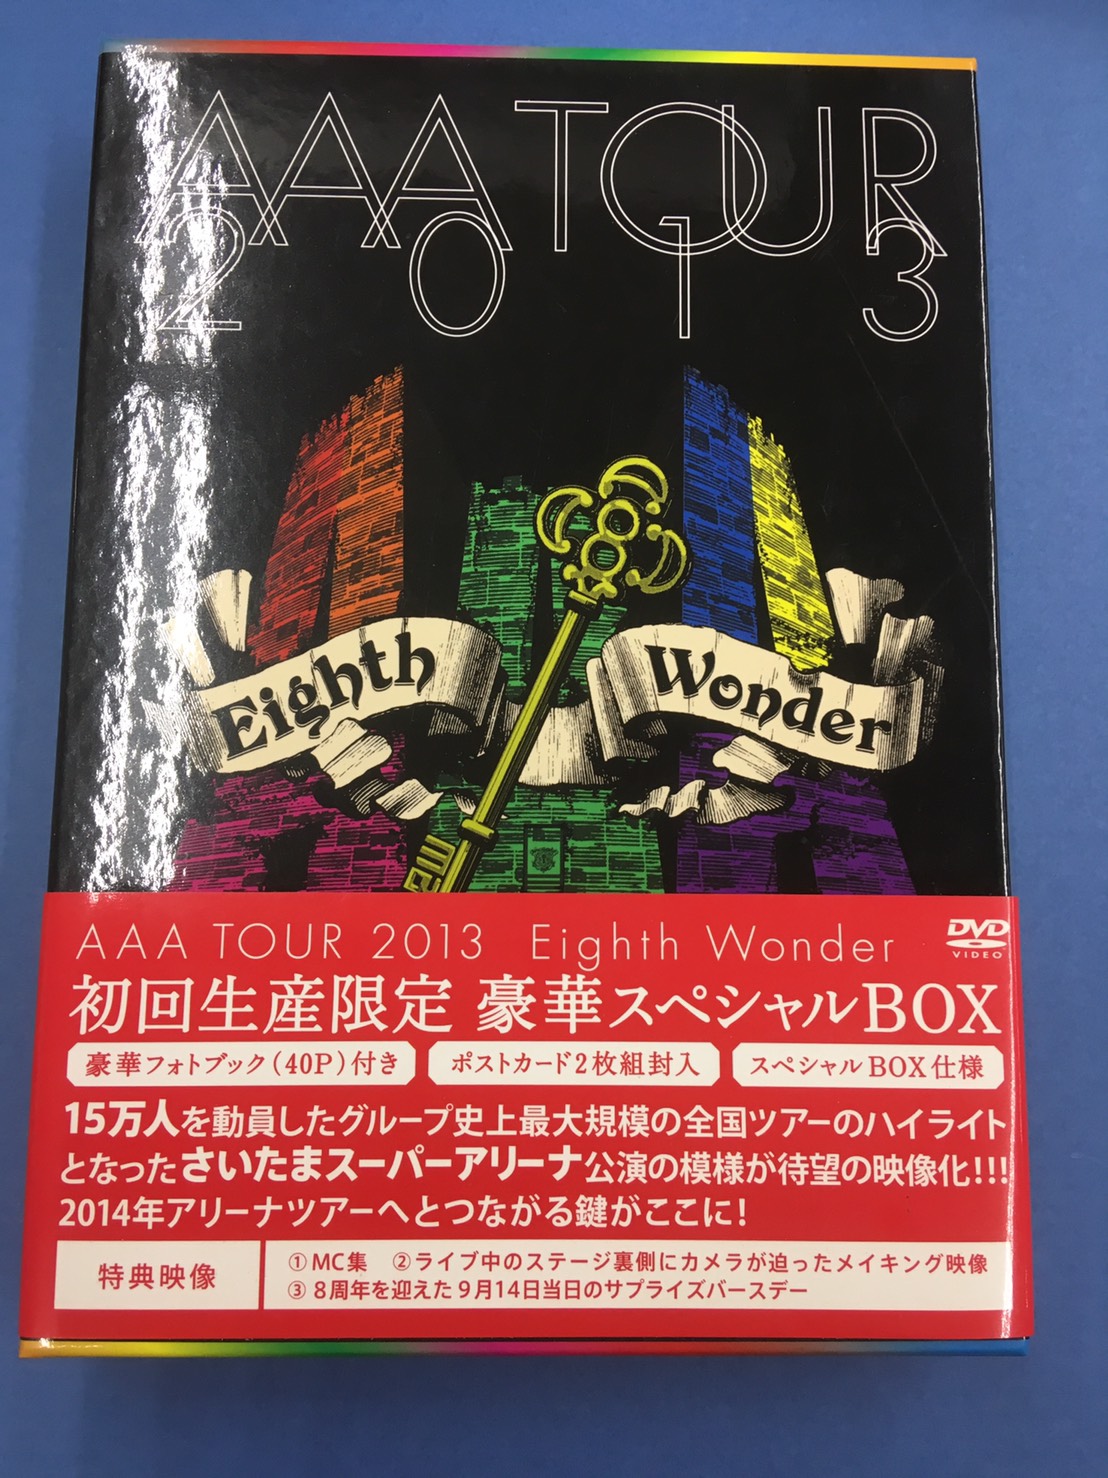 AAA ARENA TOUR 2013 & 2014（DVDセット） | primmo-flash.fr